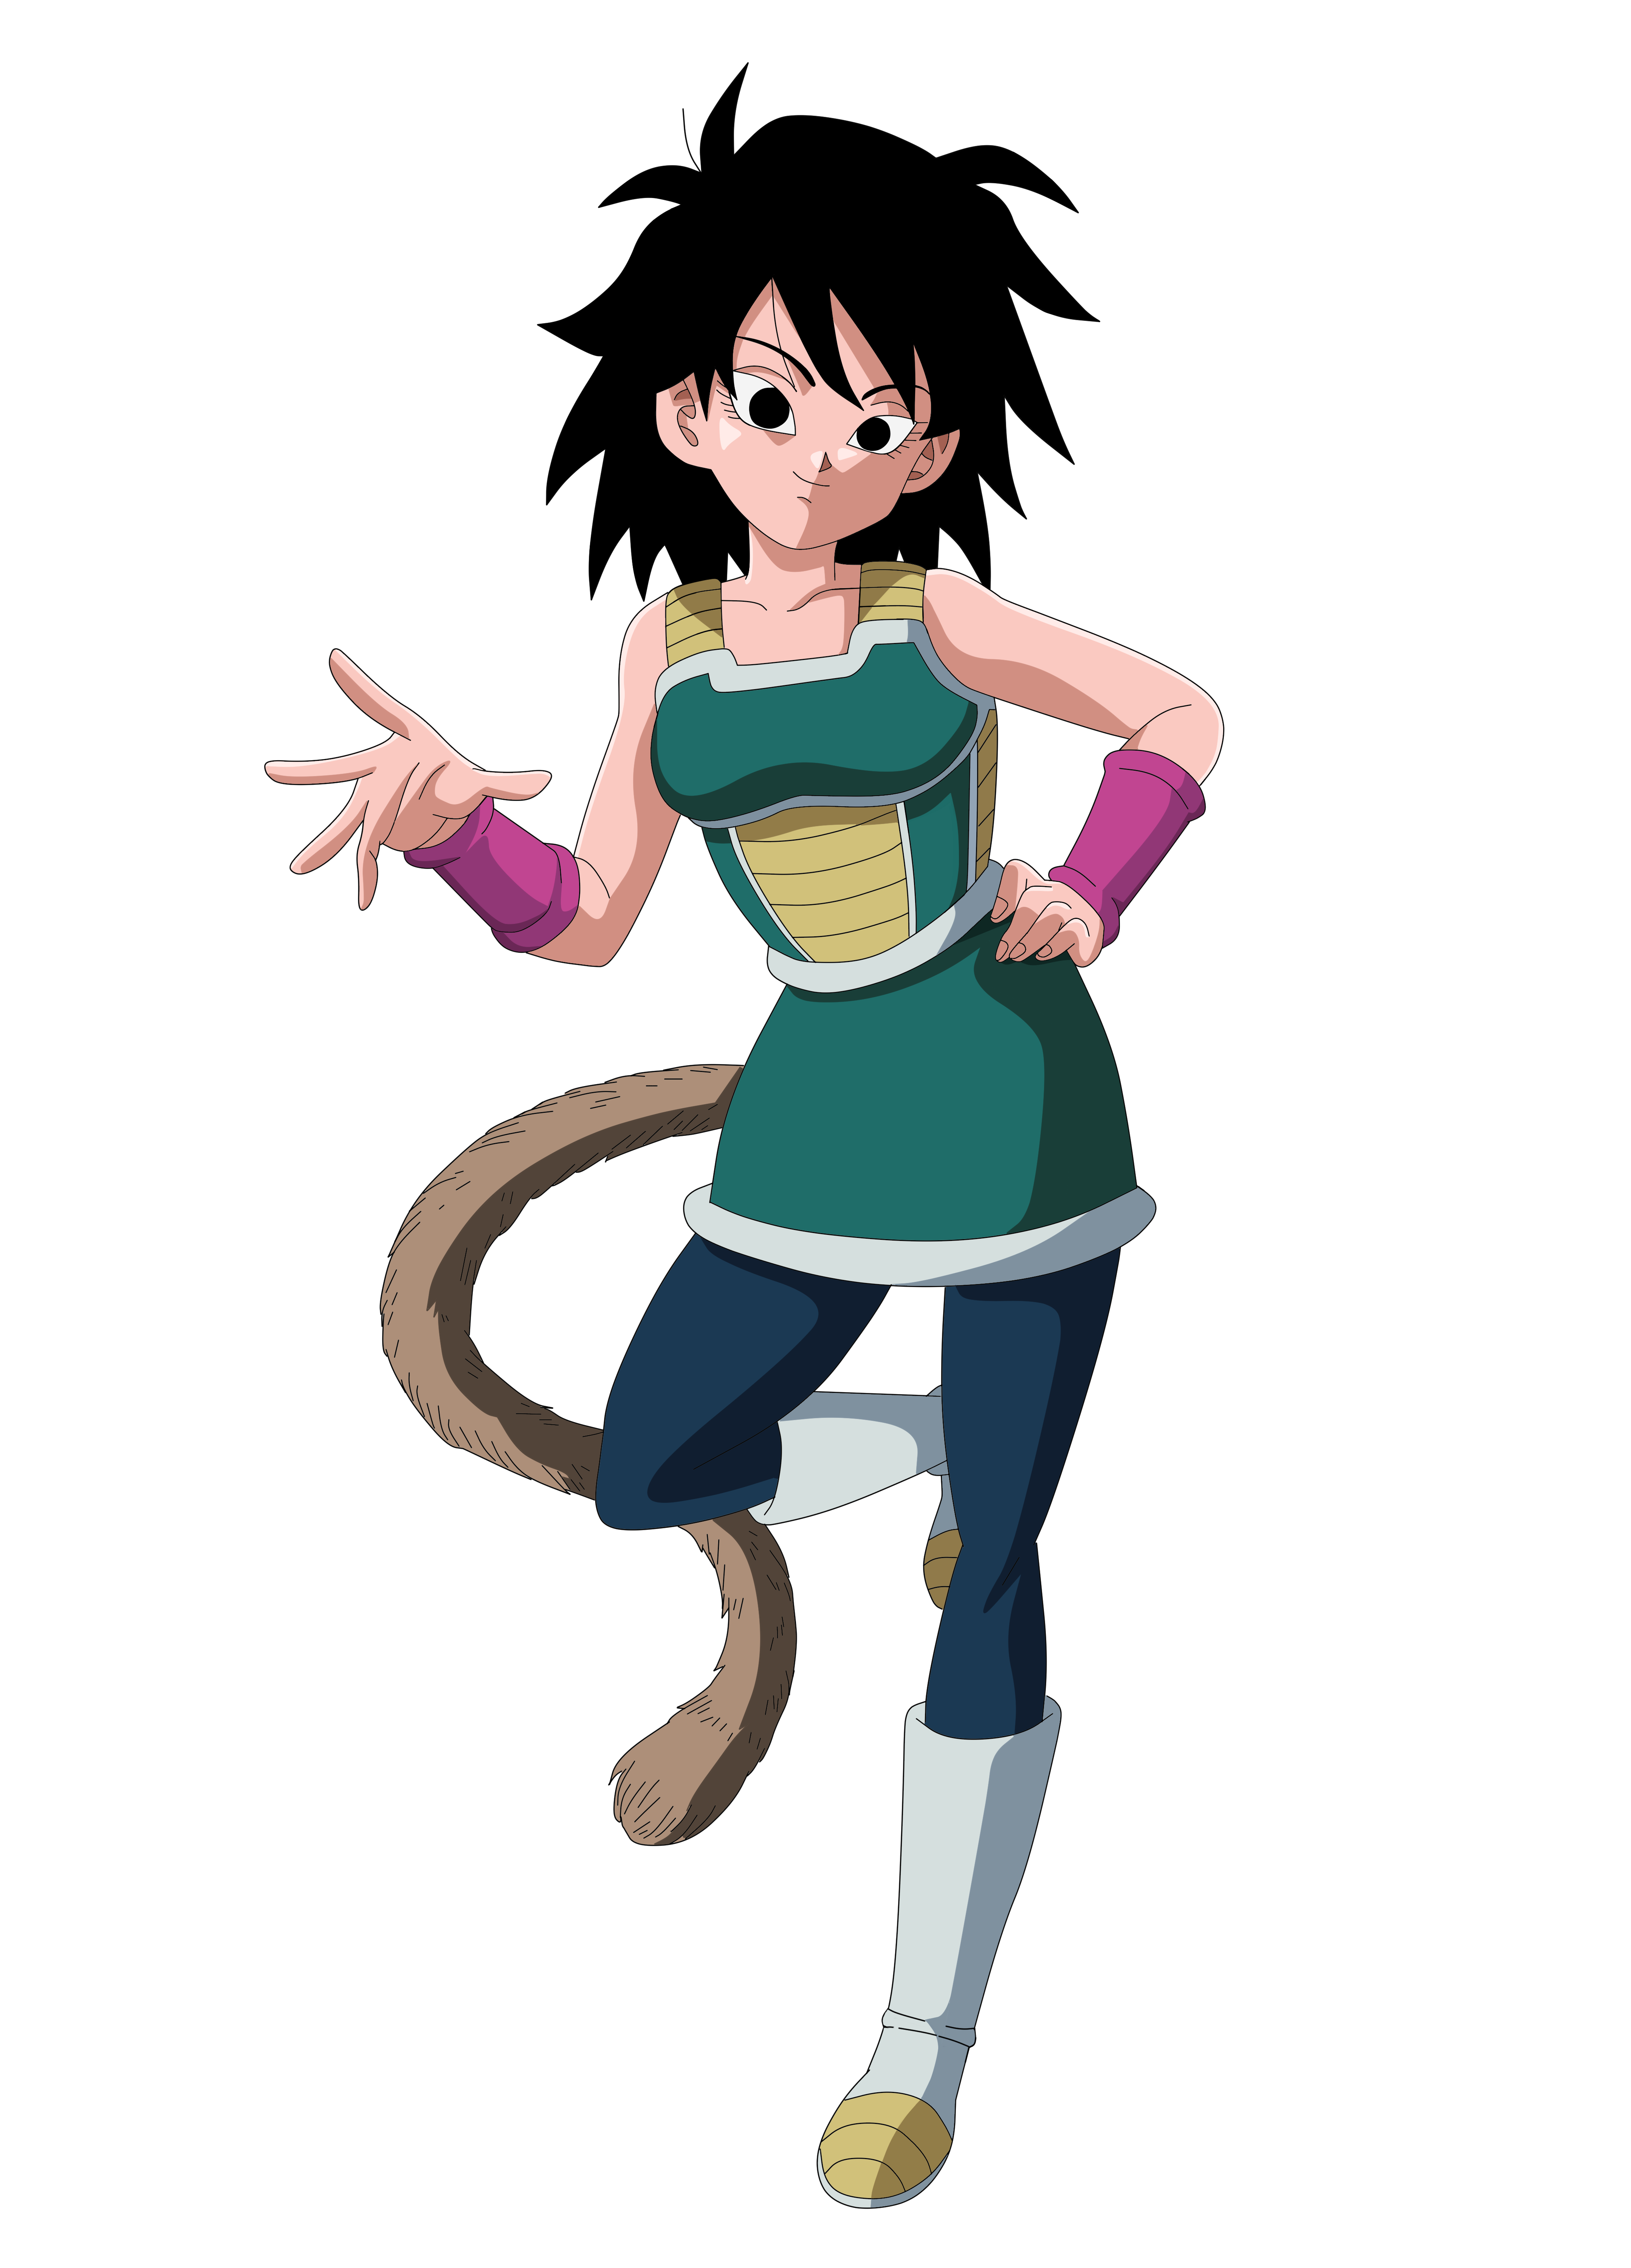 Dragon Ball Super 66 OOB by END7777 on DeviantArt